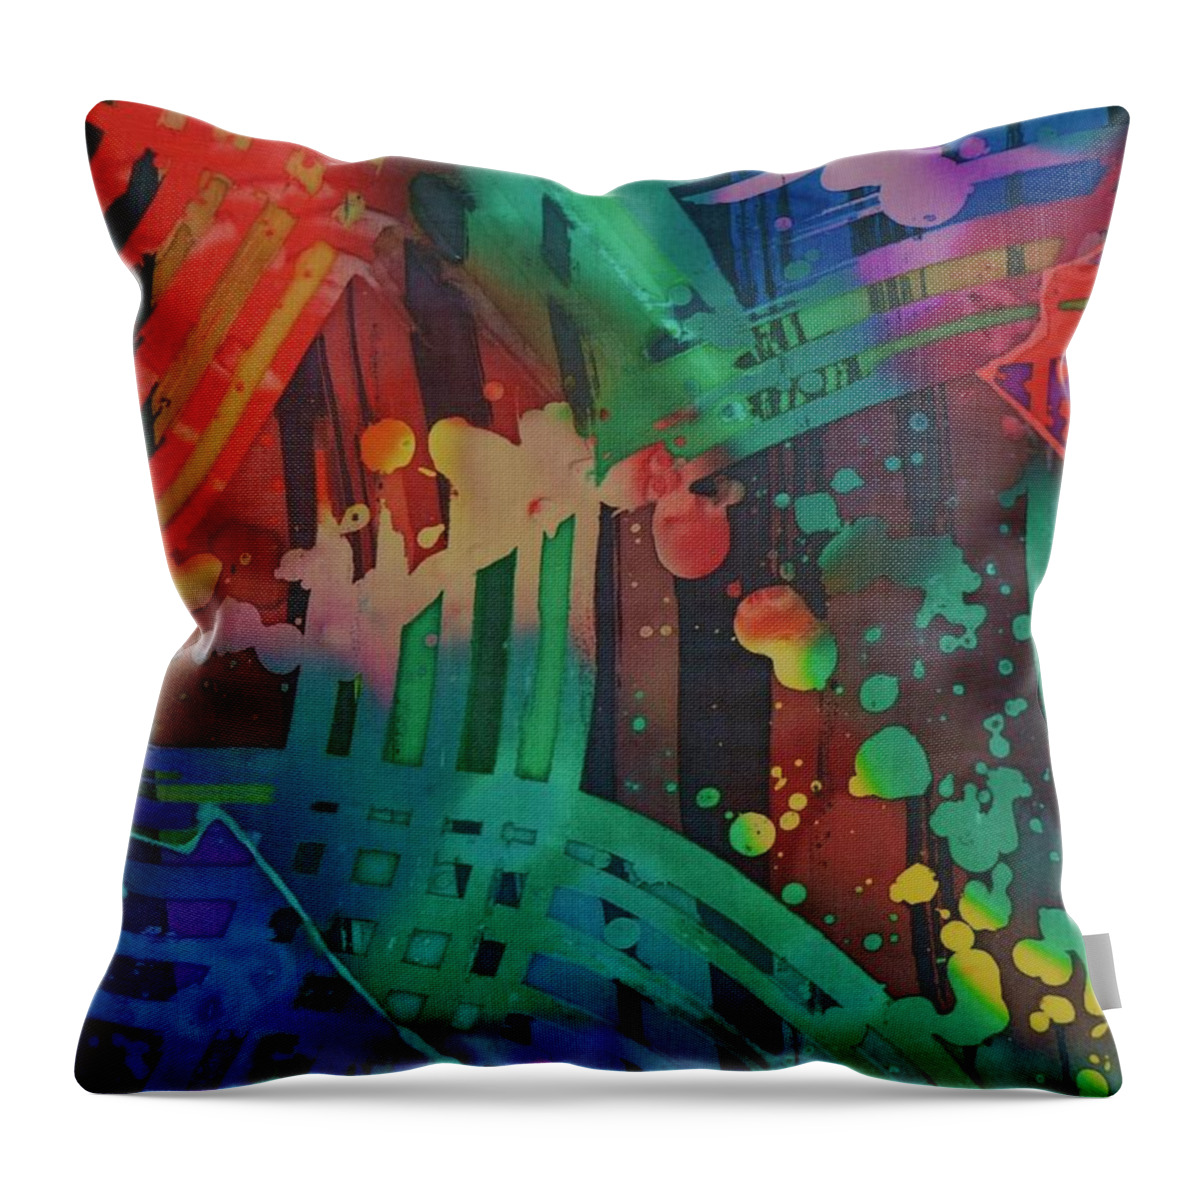 Abstract Throw Pillow featuring the painting Squares And Other Shapes 2 by Barbara Pease